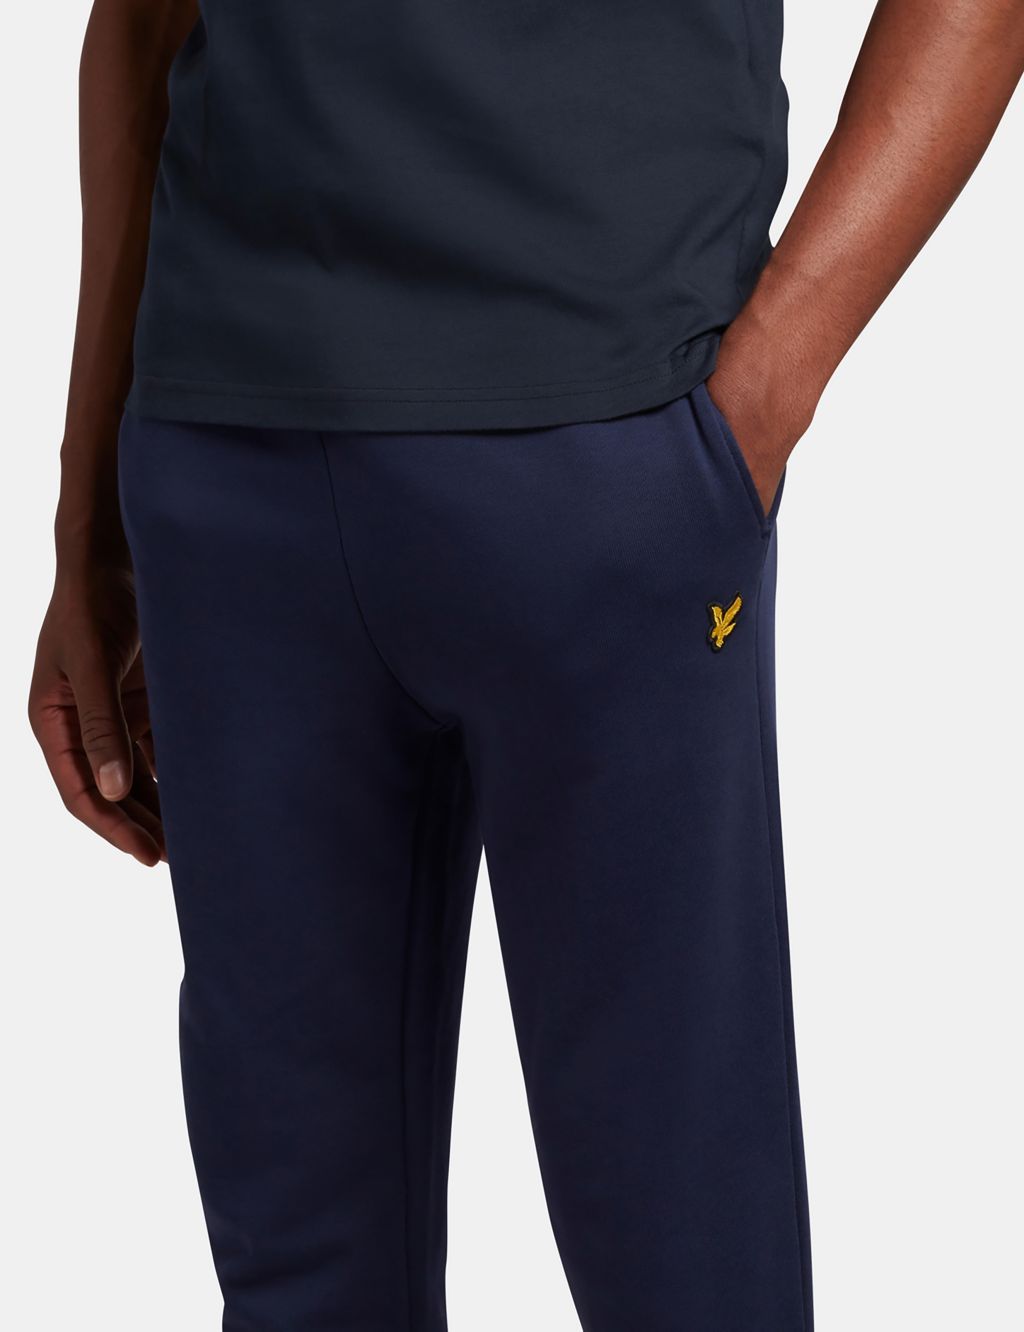 Regular Fit Pure Cotton Joggers image 3